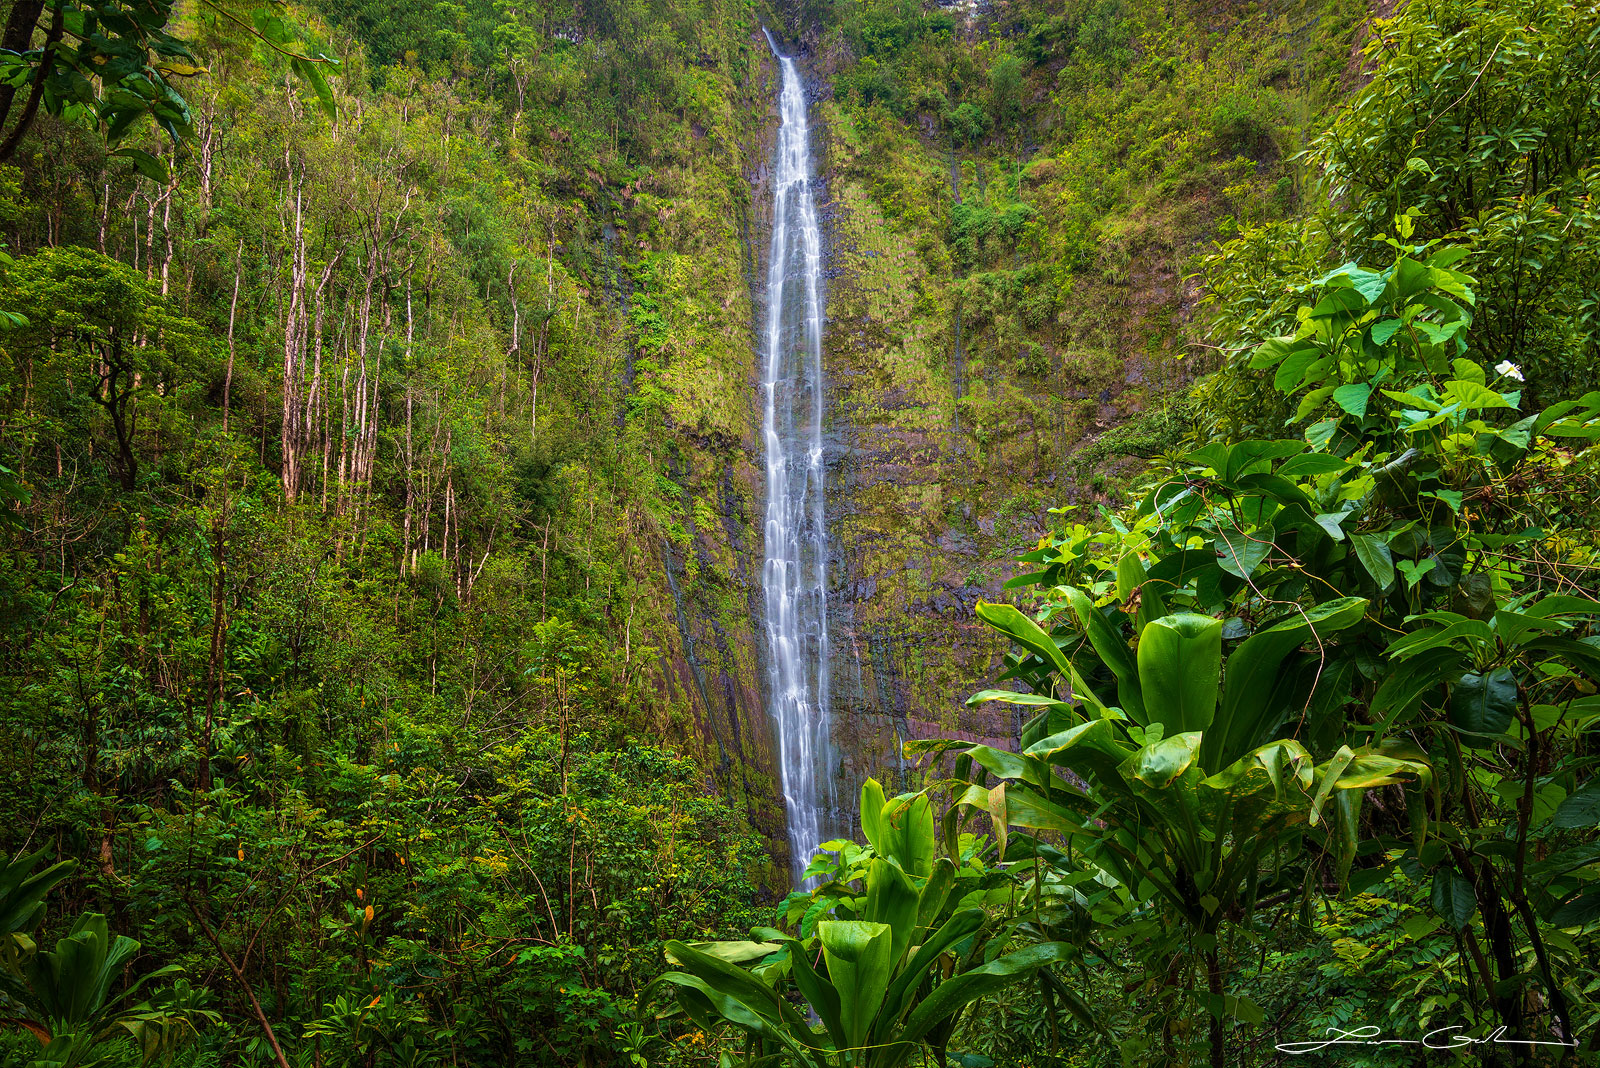 Discover the majesty of a tall waterfall in 'Secret Paradise' in Maui, HI with lush green vegetation - Gintchin Fine Art.